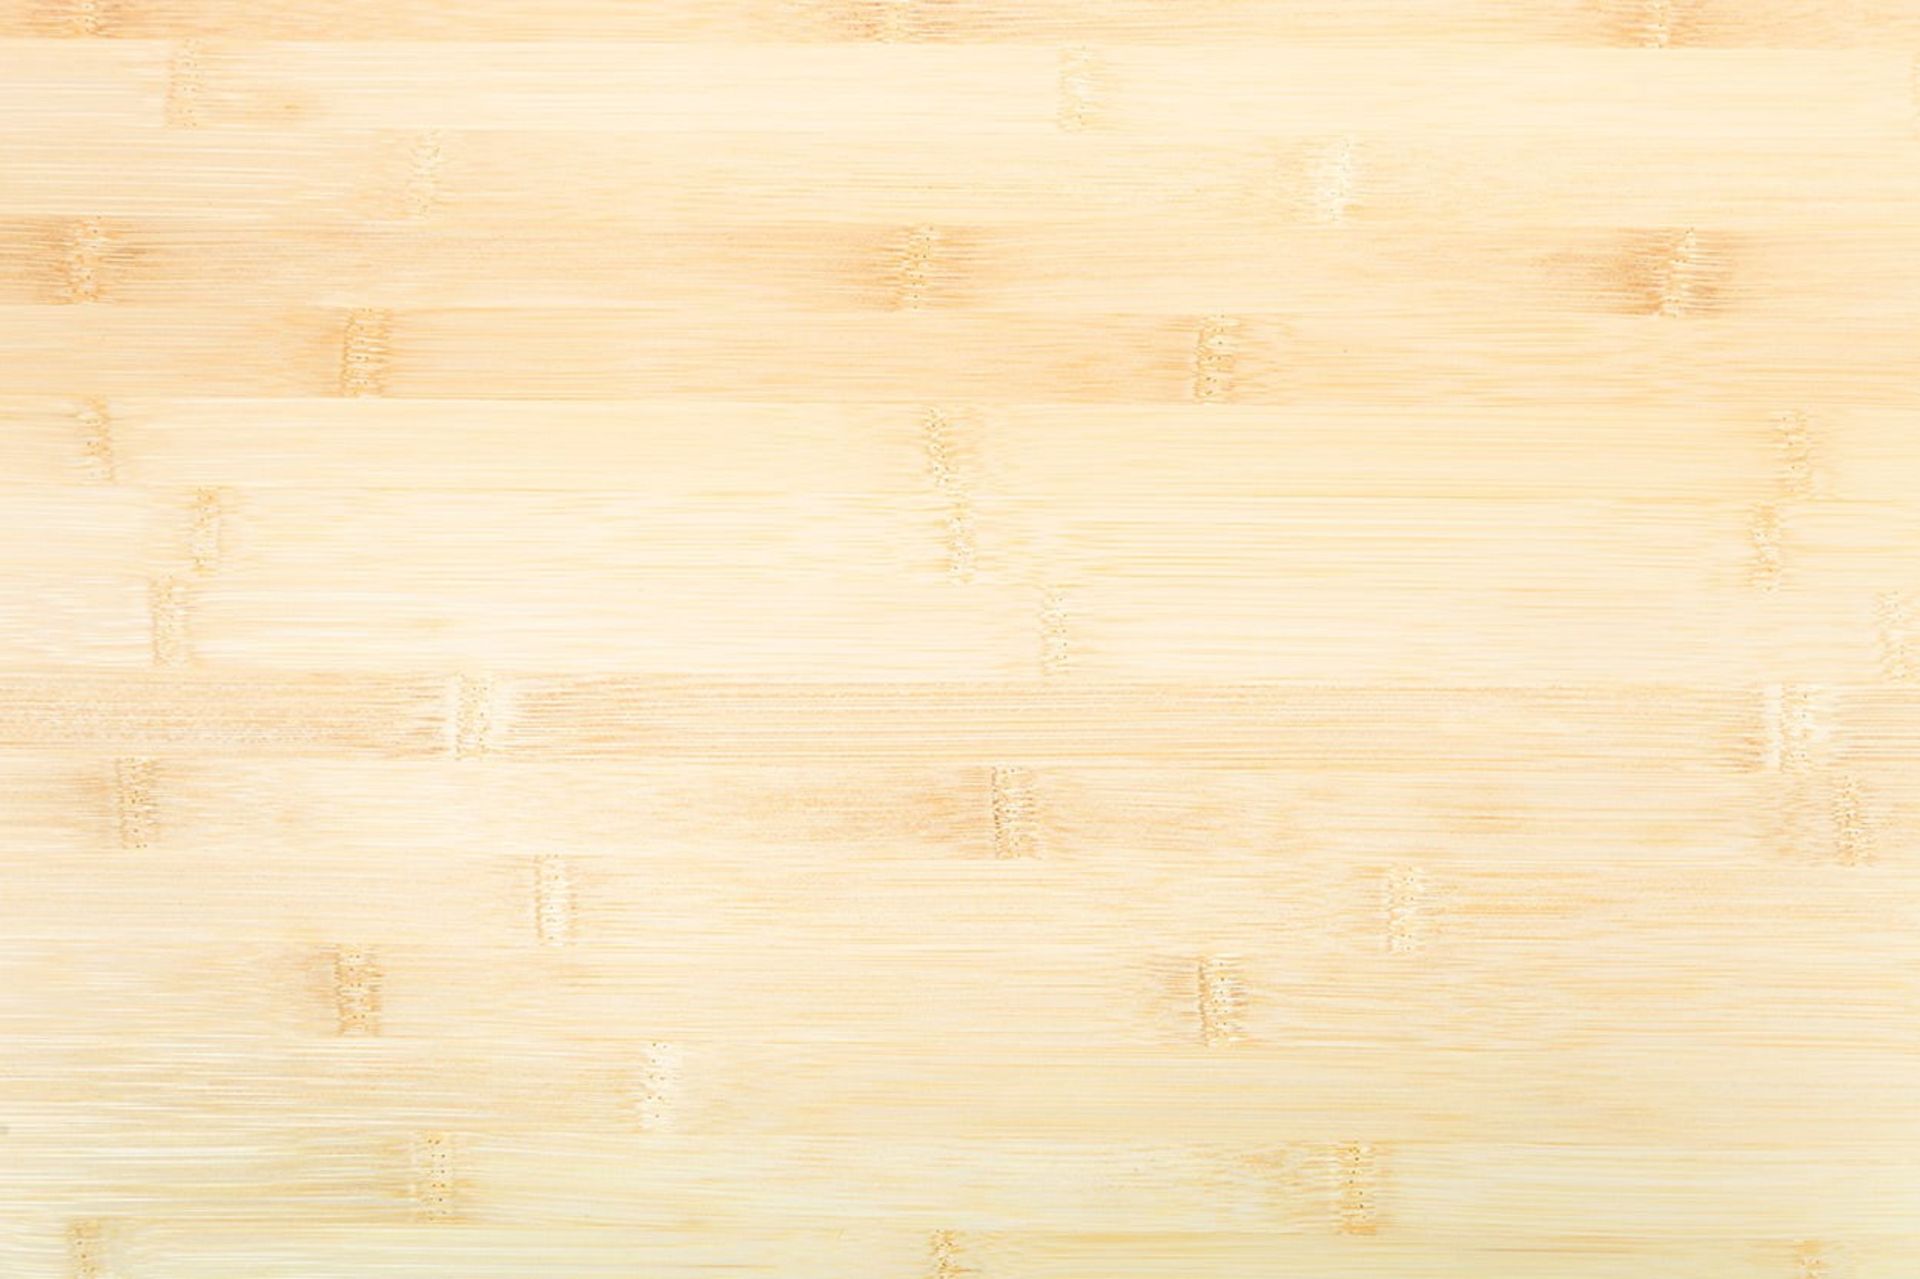 1 x Layered Solid Bamboo Wood Worktop - Size: 3000 x 650 x 40mm - Ideal For Kitchens, Countertops, - Image 4 of 4